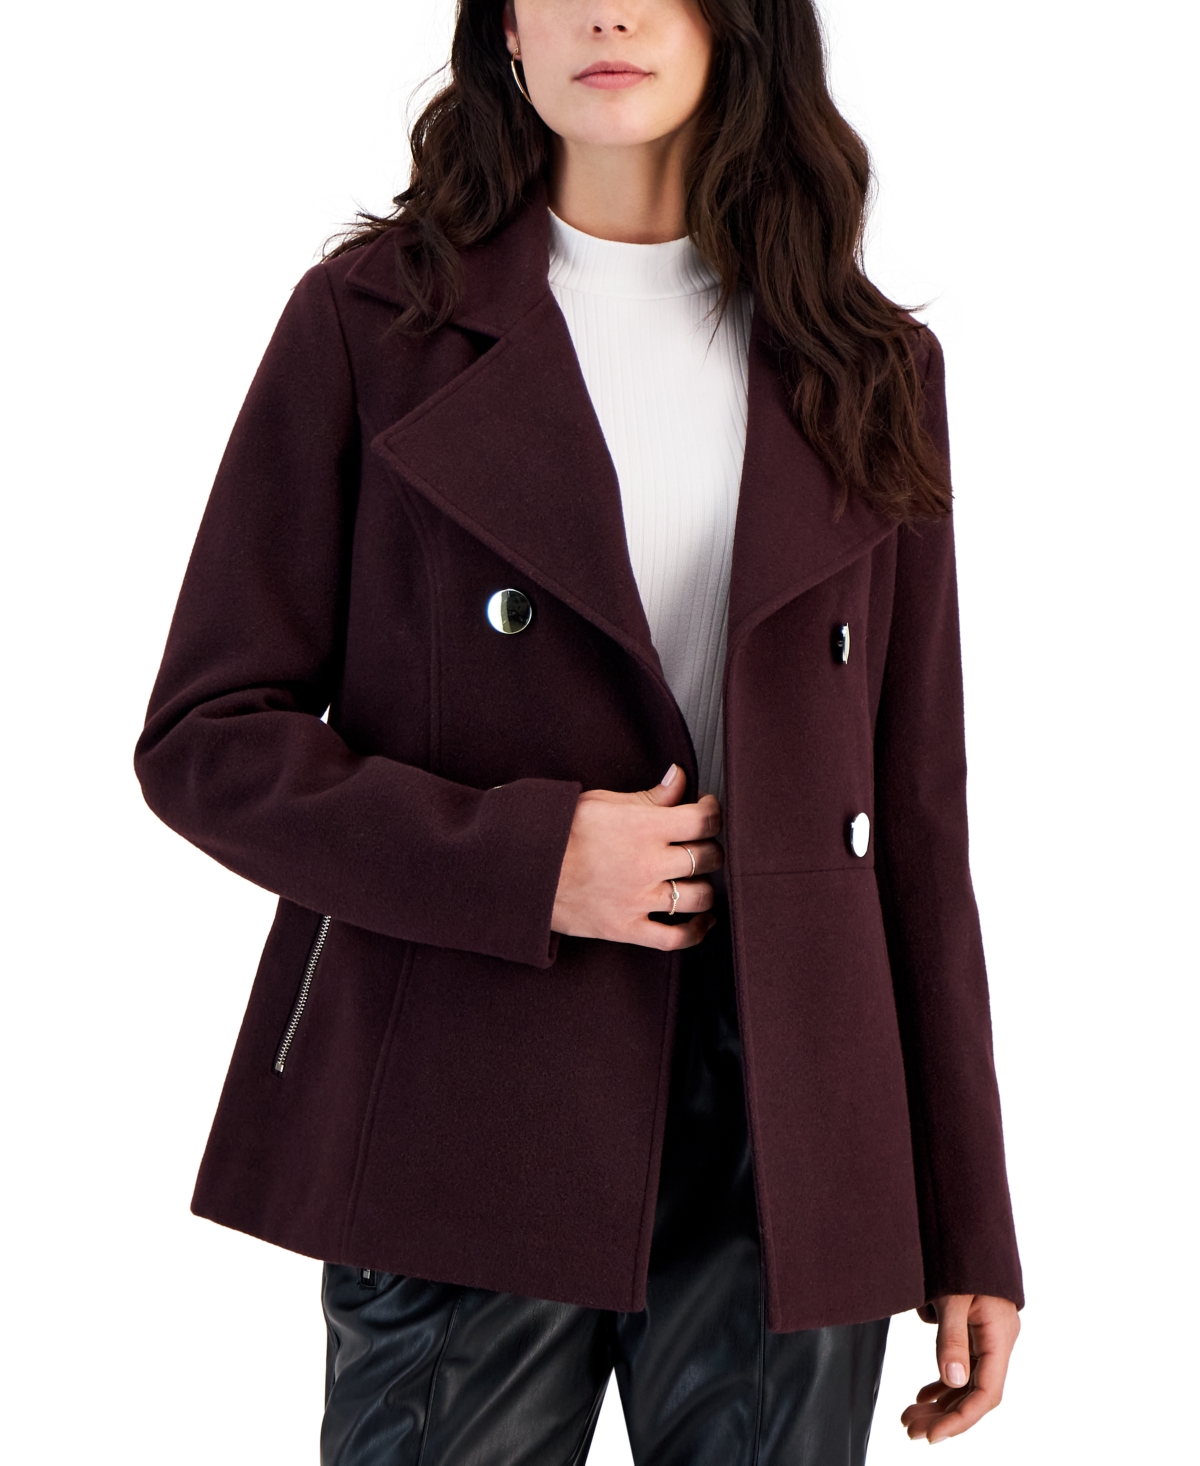 Juniors' Double-Breasted Long-Sleeve Peacoat, Created for Macy's - Wine